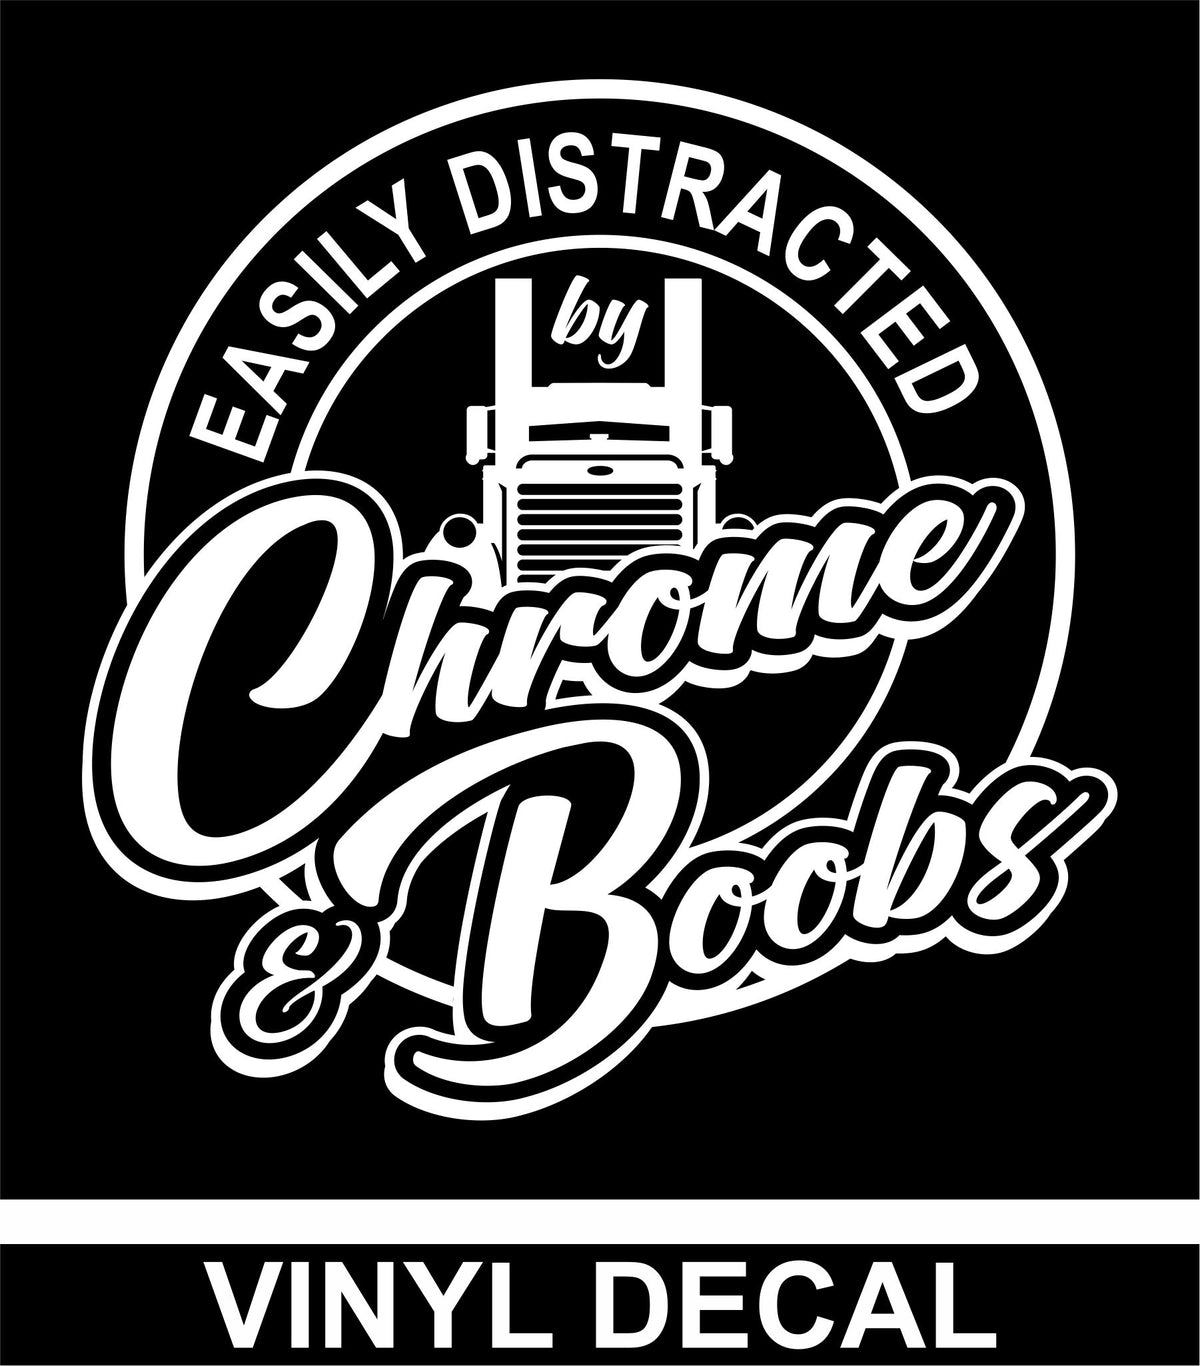 Easily Distracted by Chrome & Boobs - Pete - Vinyl Decal - Free Shipping